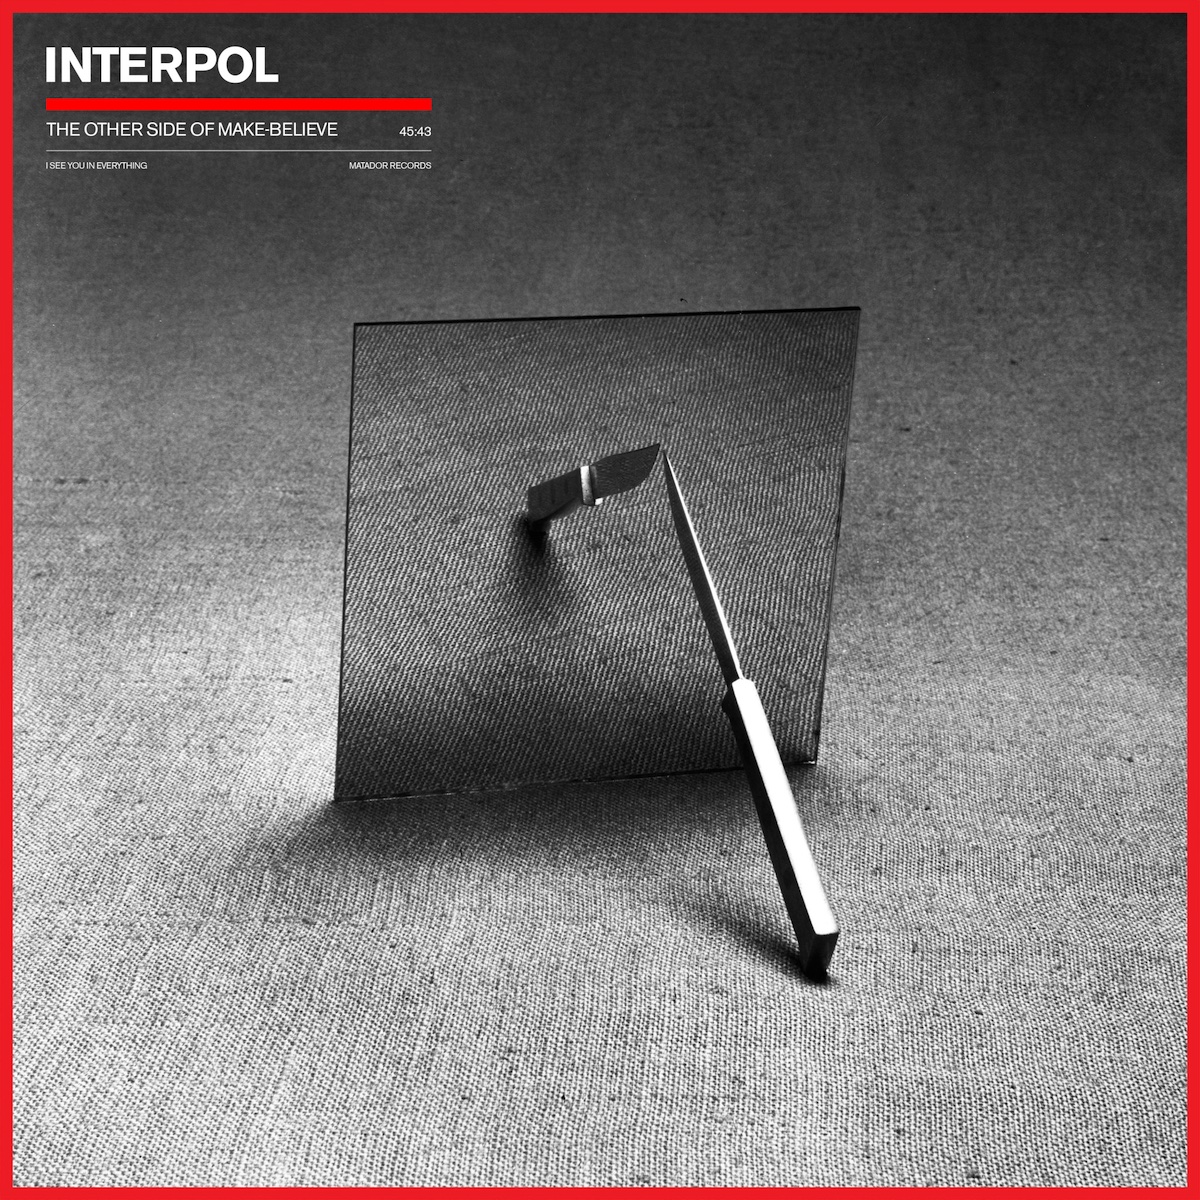 Interpol The Other Side Of Make-Believe